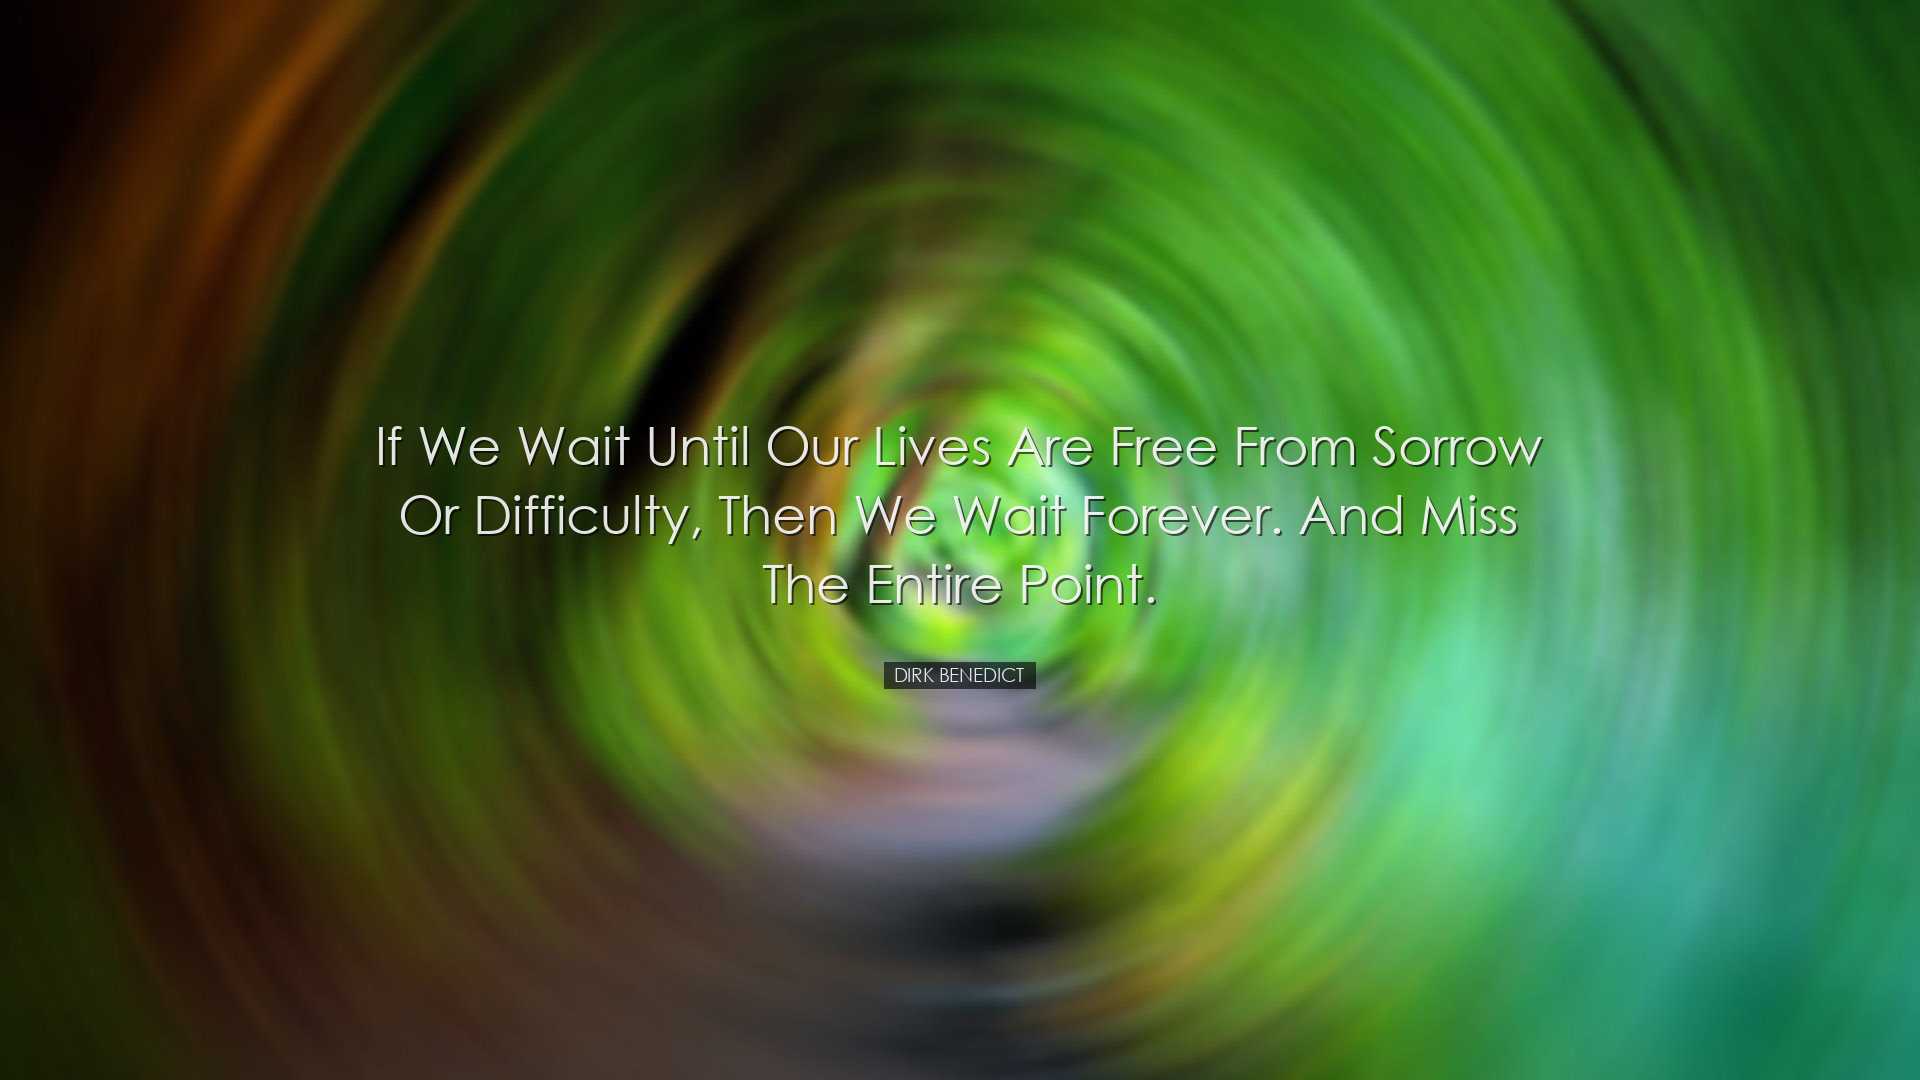 If we wait until our lives are free from sorrow or difficulty, the